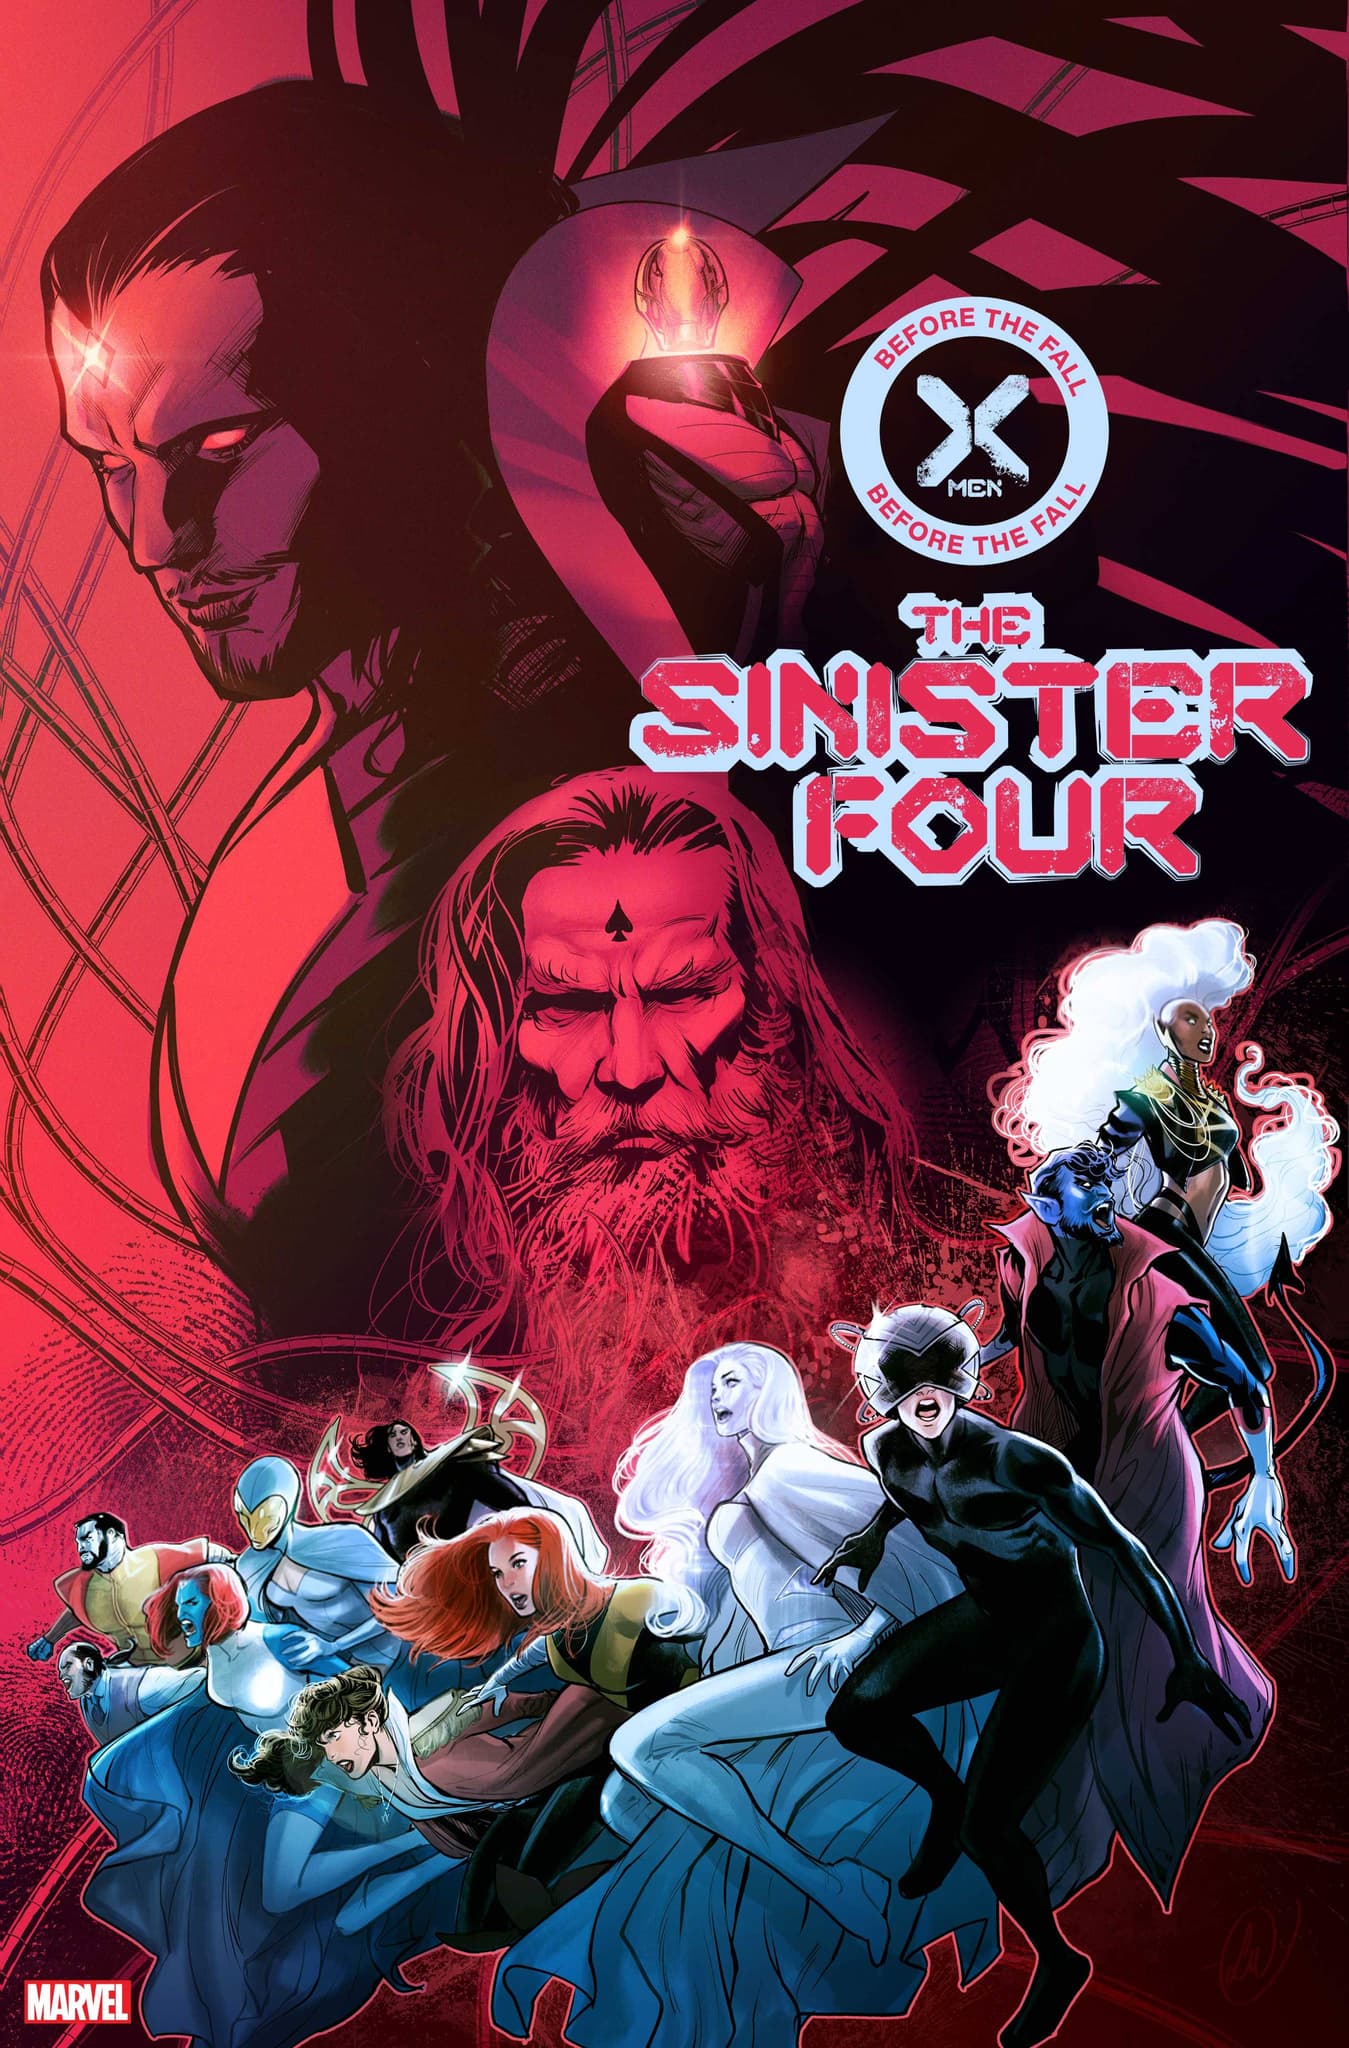 X-MEN: BEFORE THE FALL – SINISTER FOUR #1 cover by Lucas Werneck